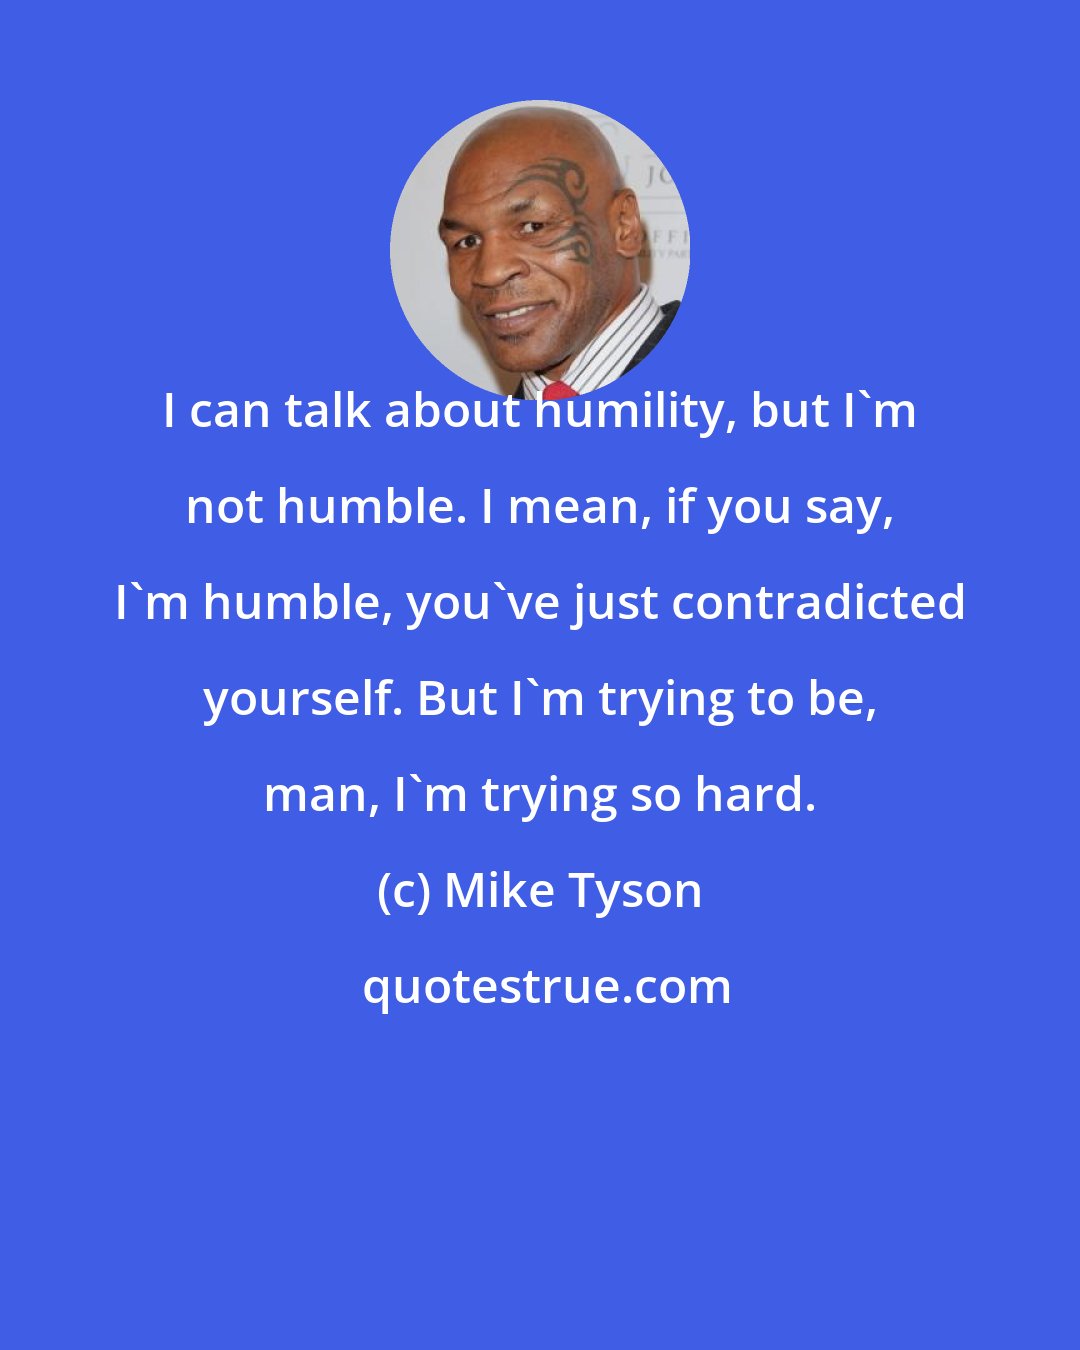 Mike Tyson: I can talk about humility, but I'm not humble. I mean, if you say, I'm humble, you've just contradicted yourself. But I'm trying to be, man, I'm trying so hard.